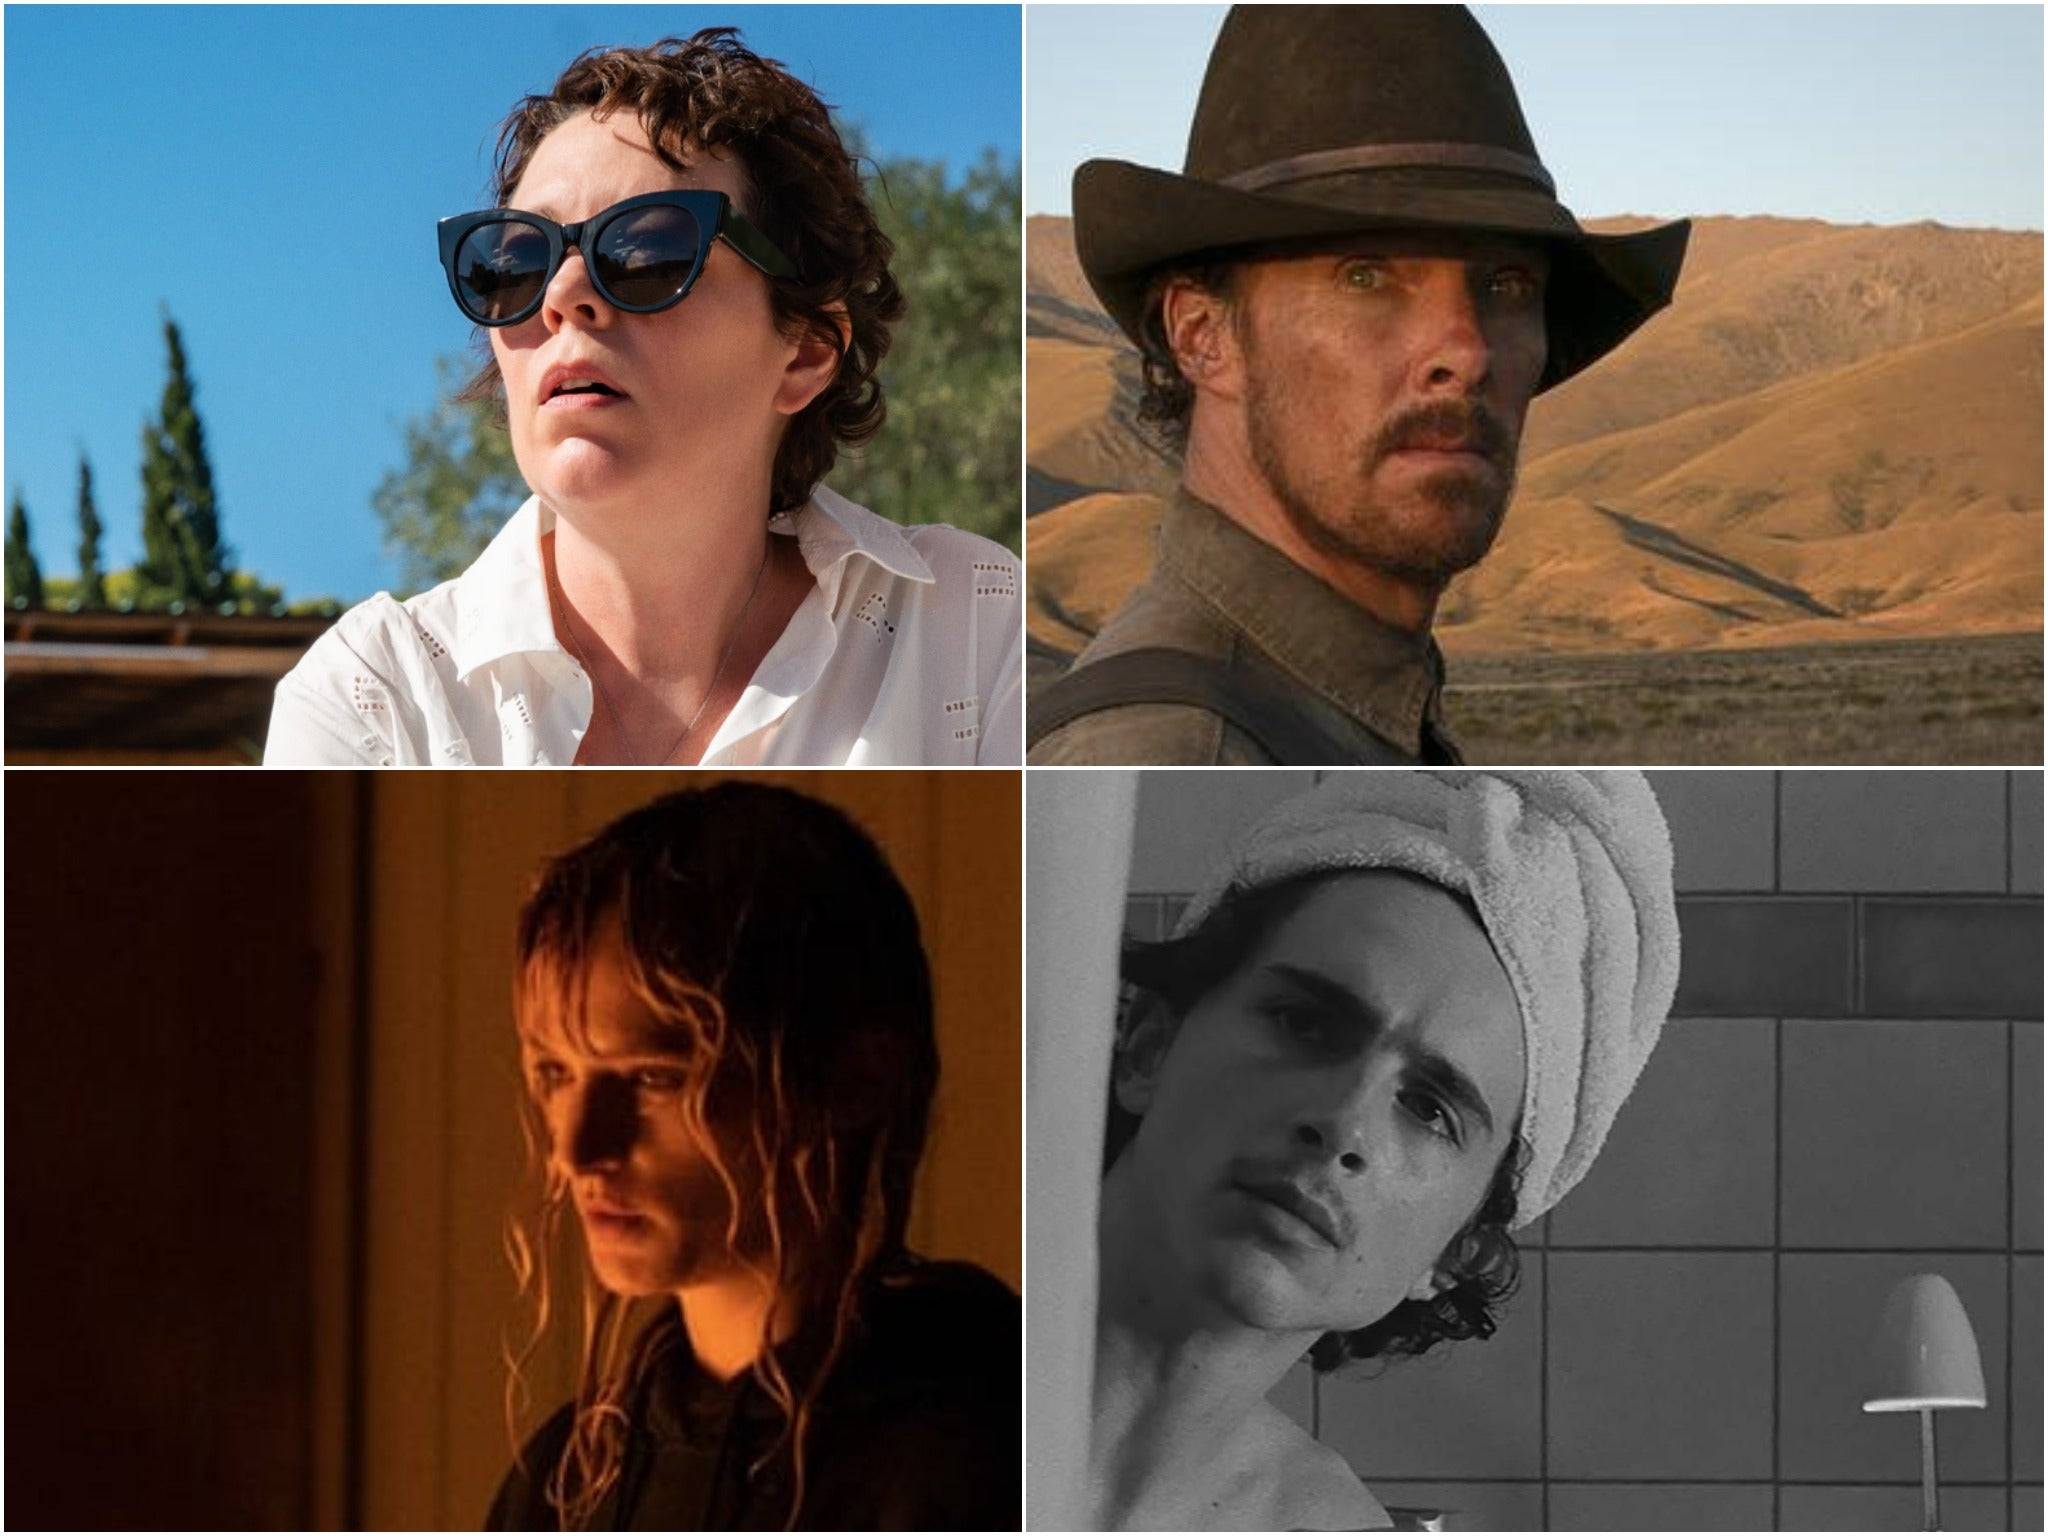 Clockwise from top right: Benedict Cumberbatch in ‘The Power of the Dog’, Timothée Chalamet in ‘The French Dispatch’, Agathe Rousselle in ‘Titane’ and Olivia Colman in ‘The Lost Daughter'